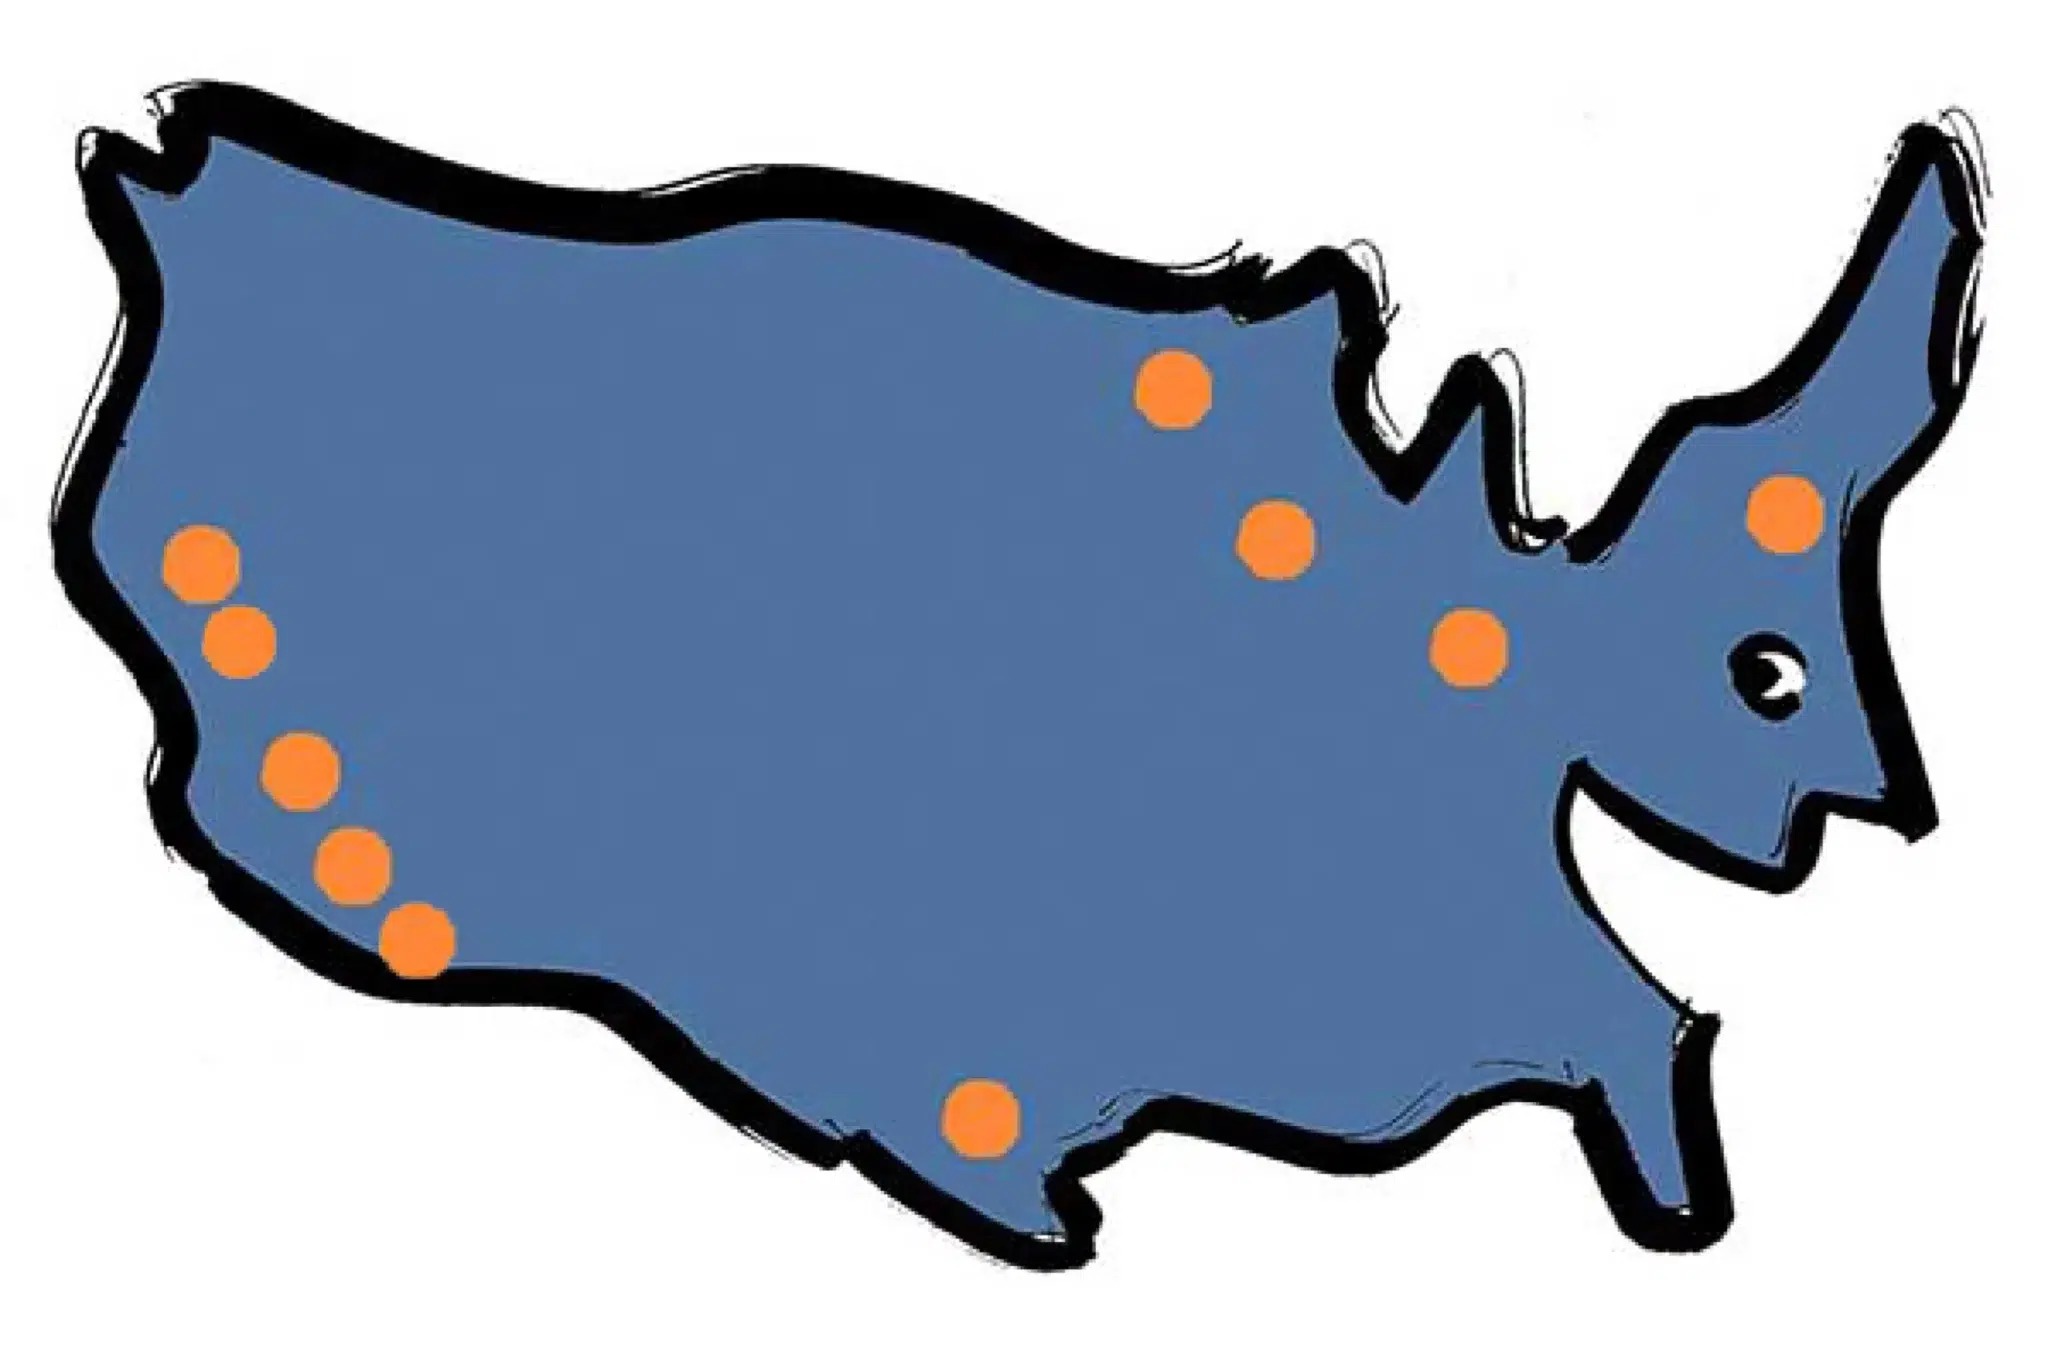 Aspiriant locations coast to coast highlighted on an illustration of the United States